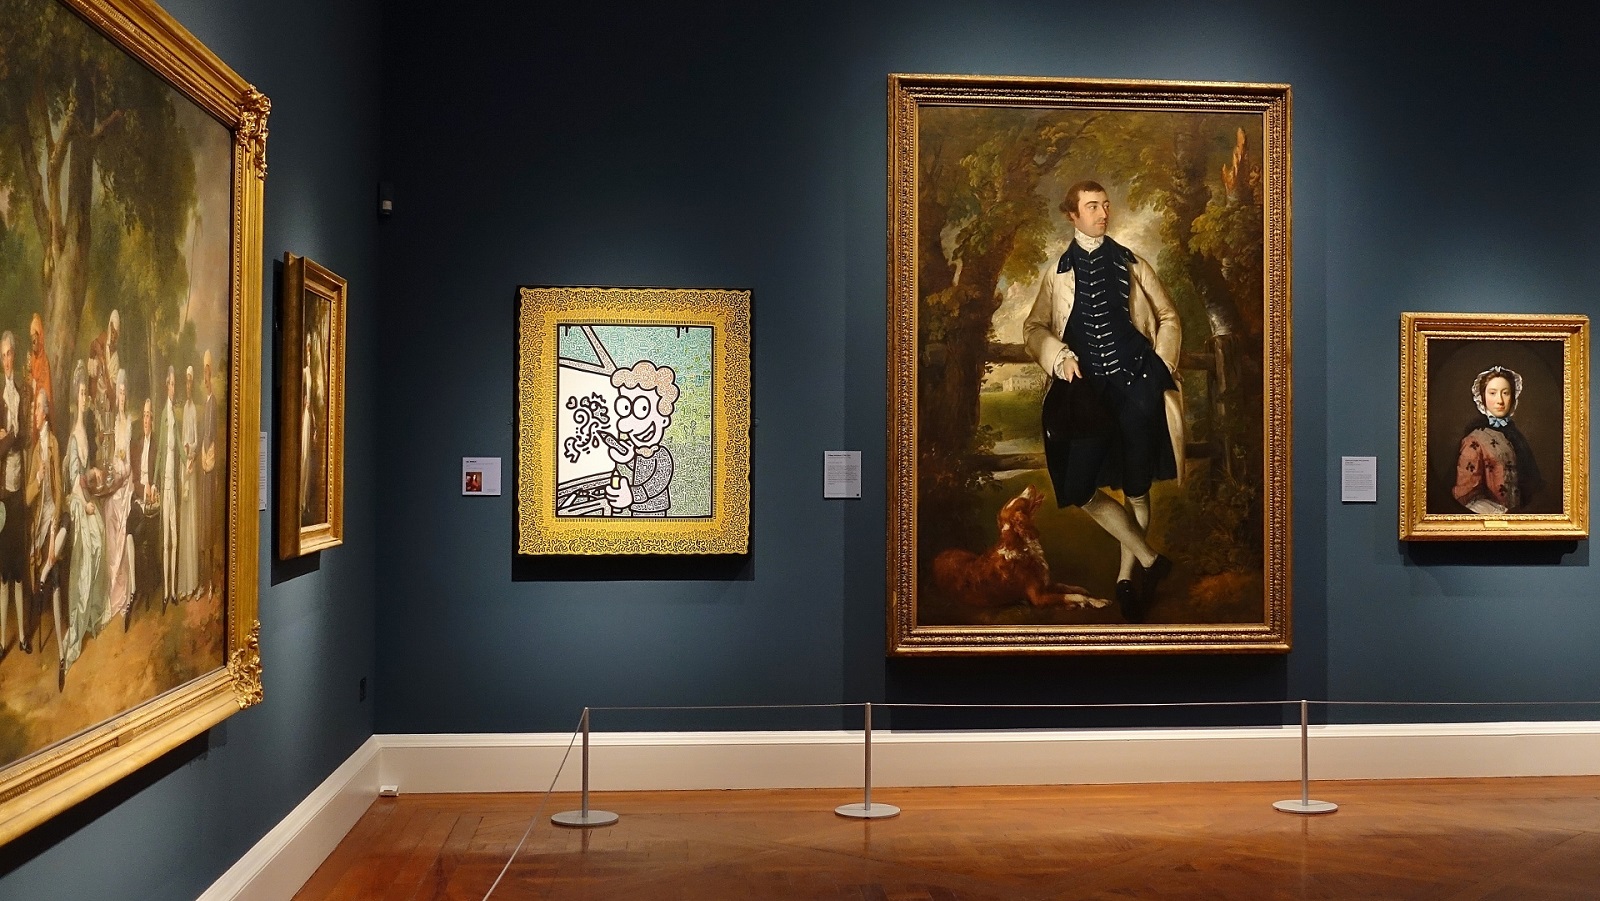 A self-portrait by Mr Doodle, featuring a cartoon man with red curly hair smiling whilst painting on a canvas, is in a smart art museum next to old colourful paintings